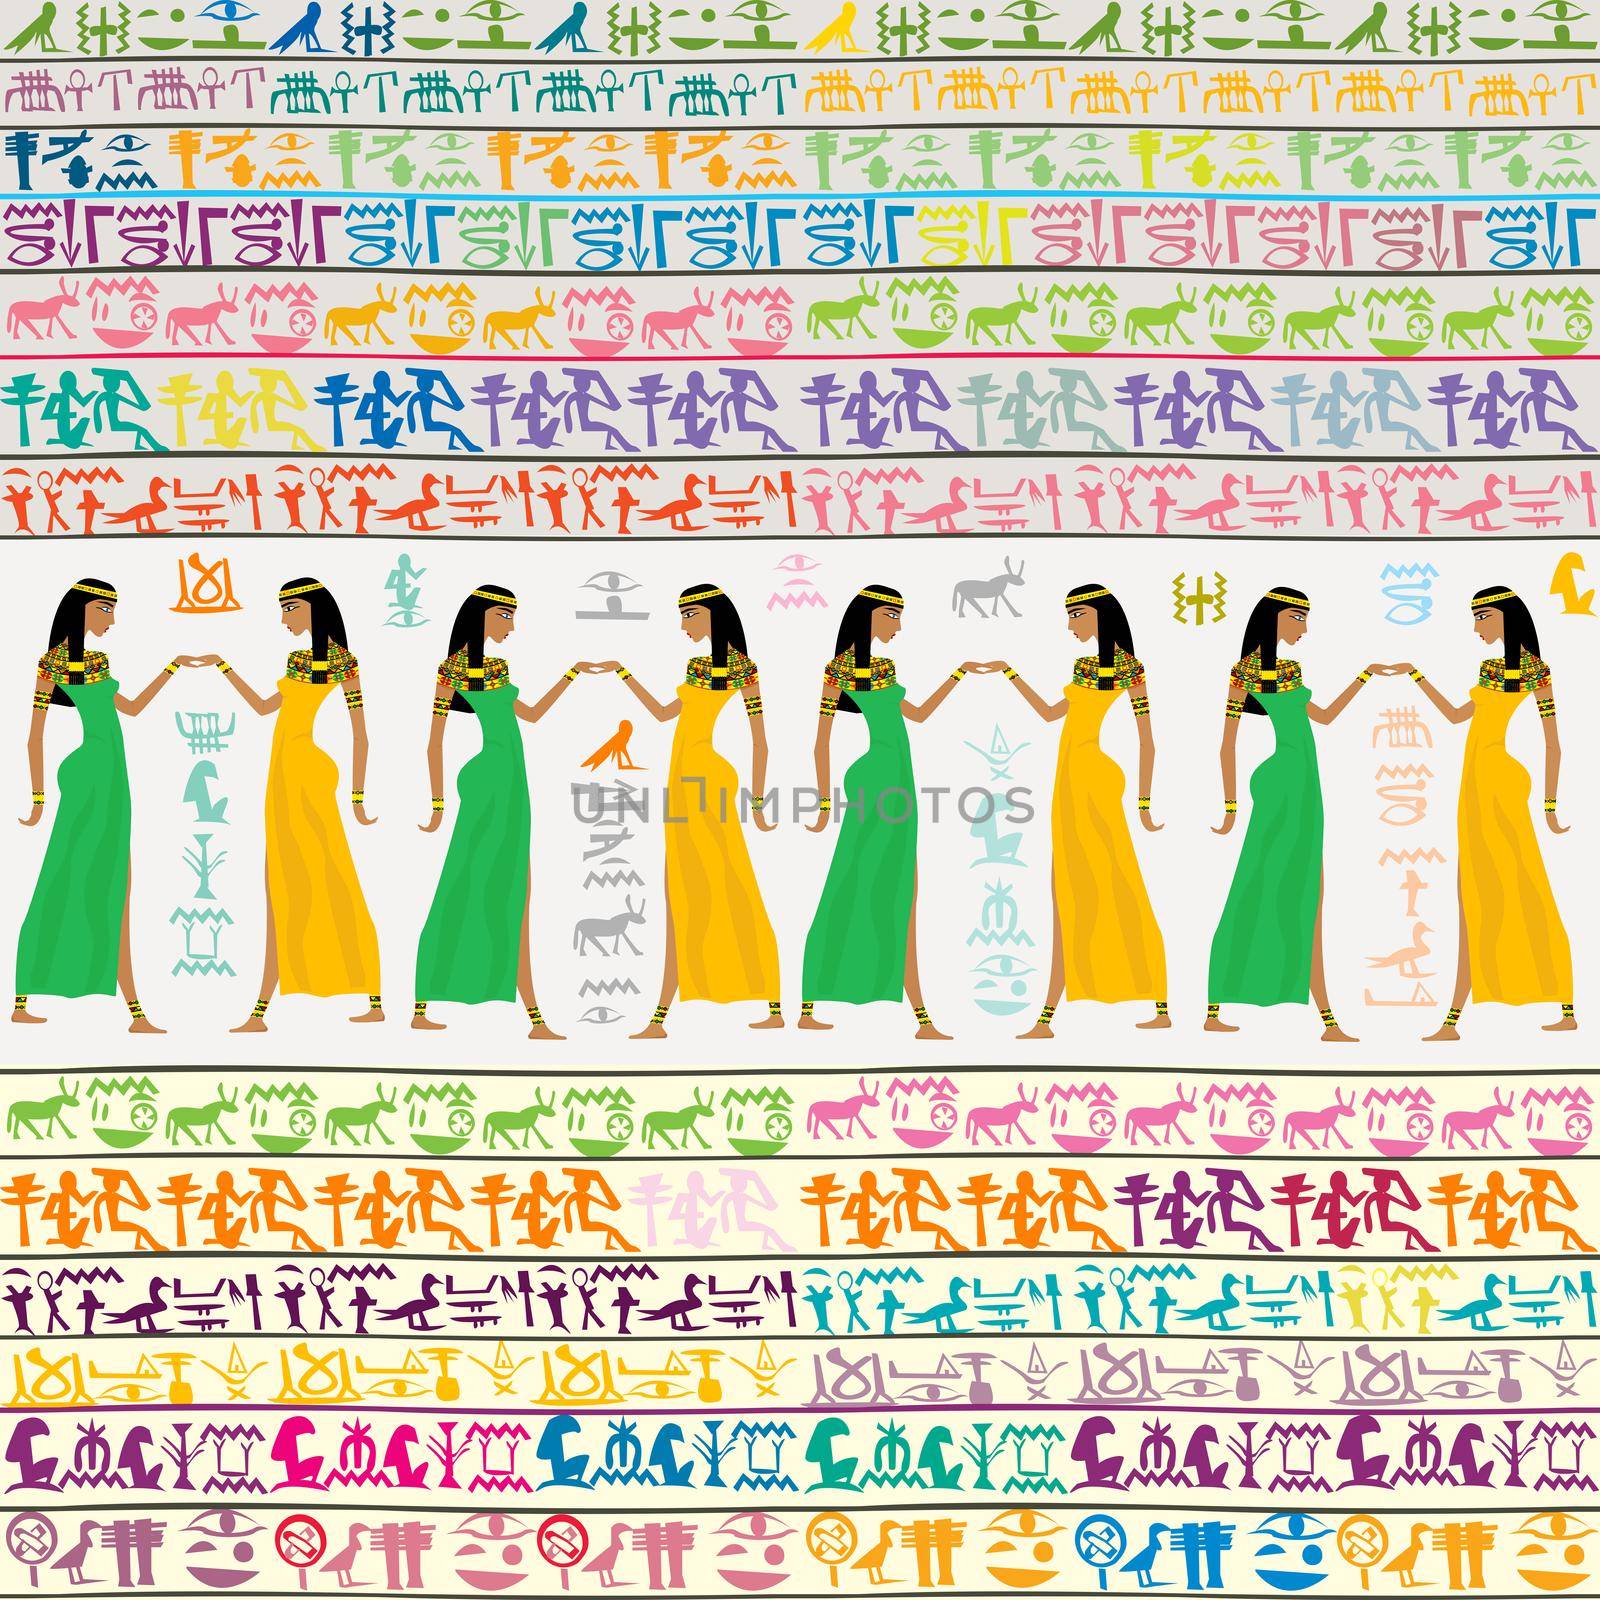 Colorful Egyptian pattern with egyptian women and hieroglyphs